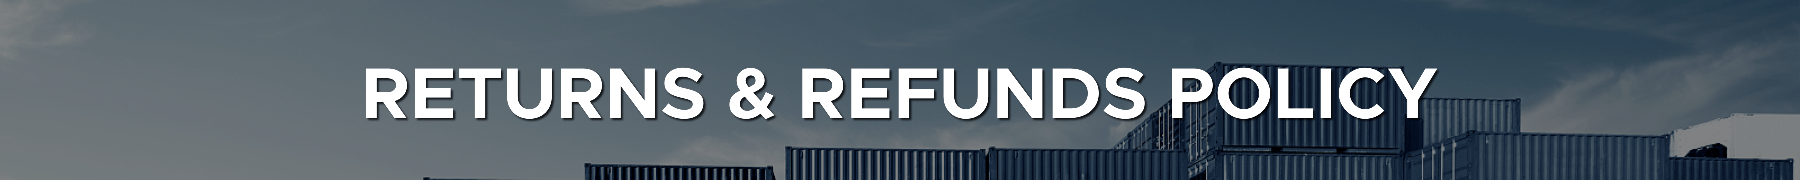 Returns Refunds Policy